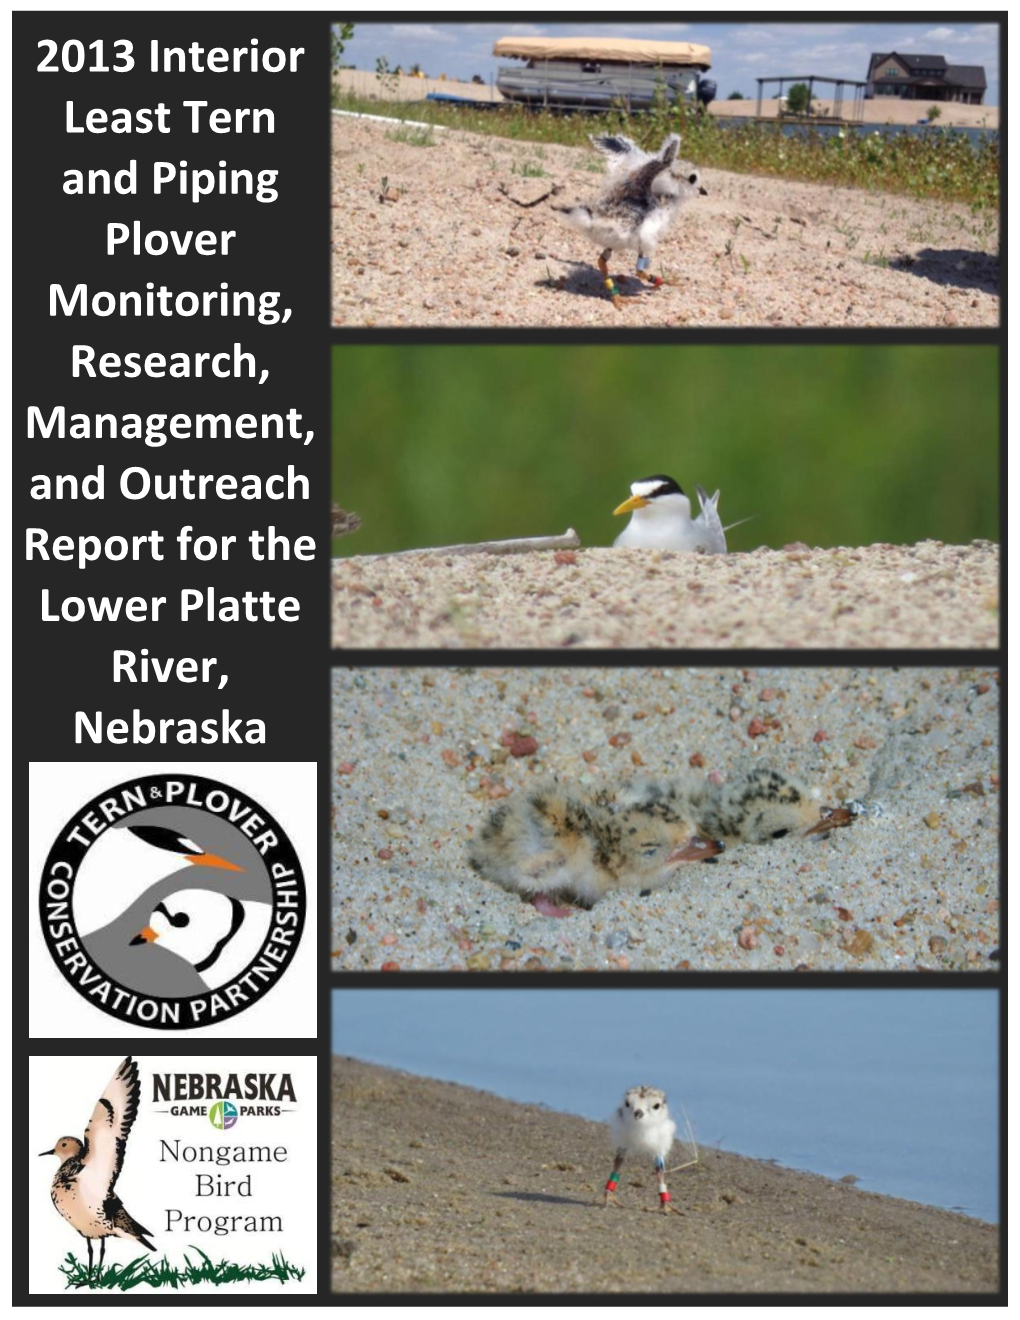 2013 Interior Least Tern and Piping Plover Monitoring, Research, Management, and Outreach Report for the Lower Platte River, Nebraska